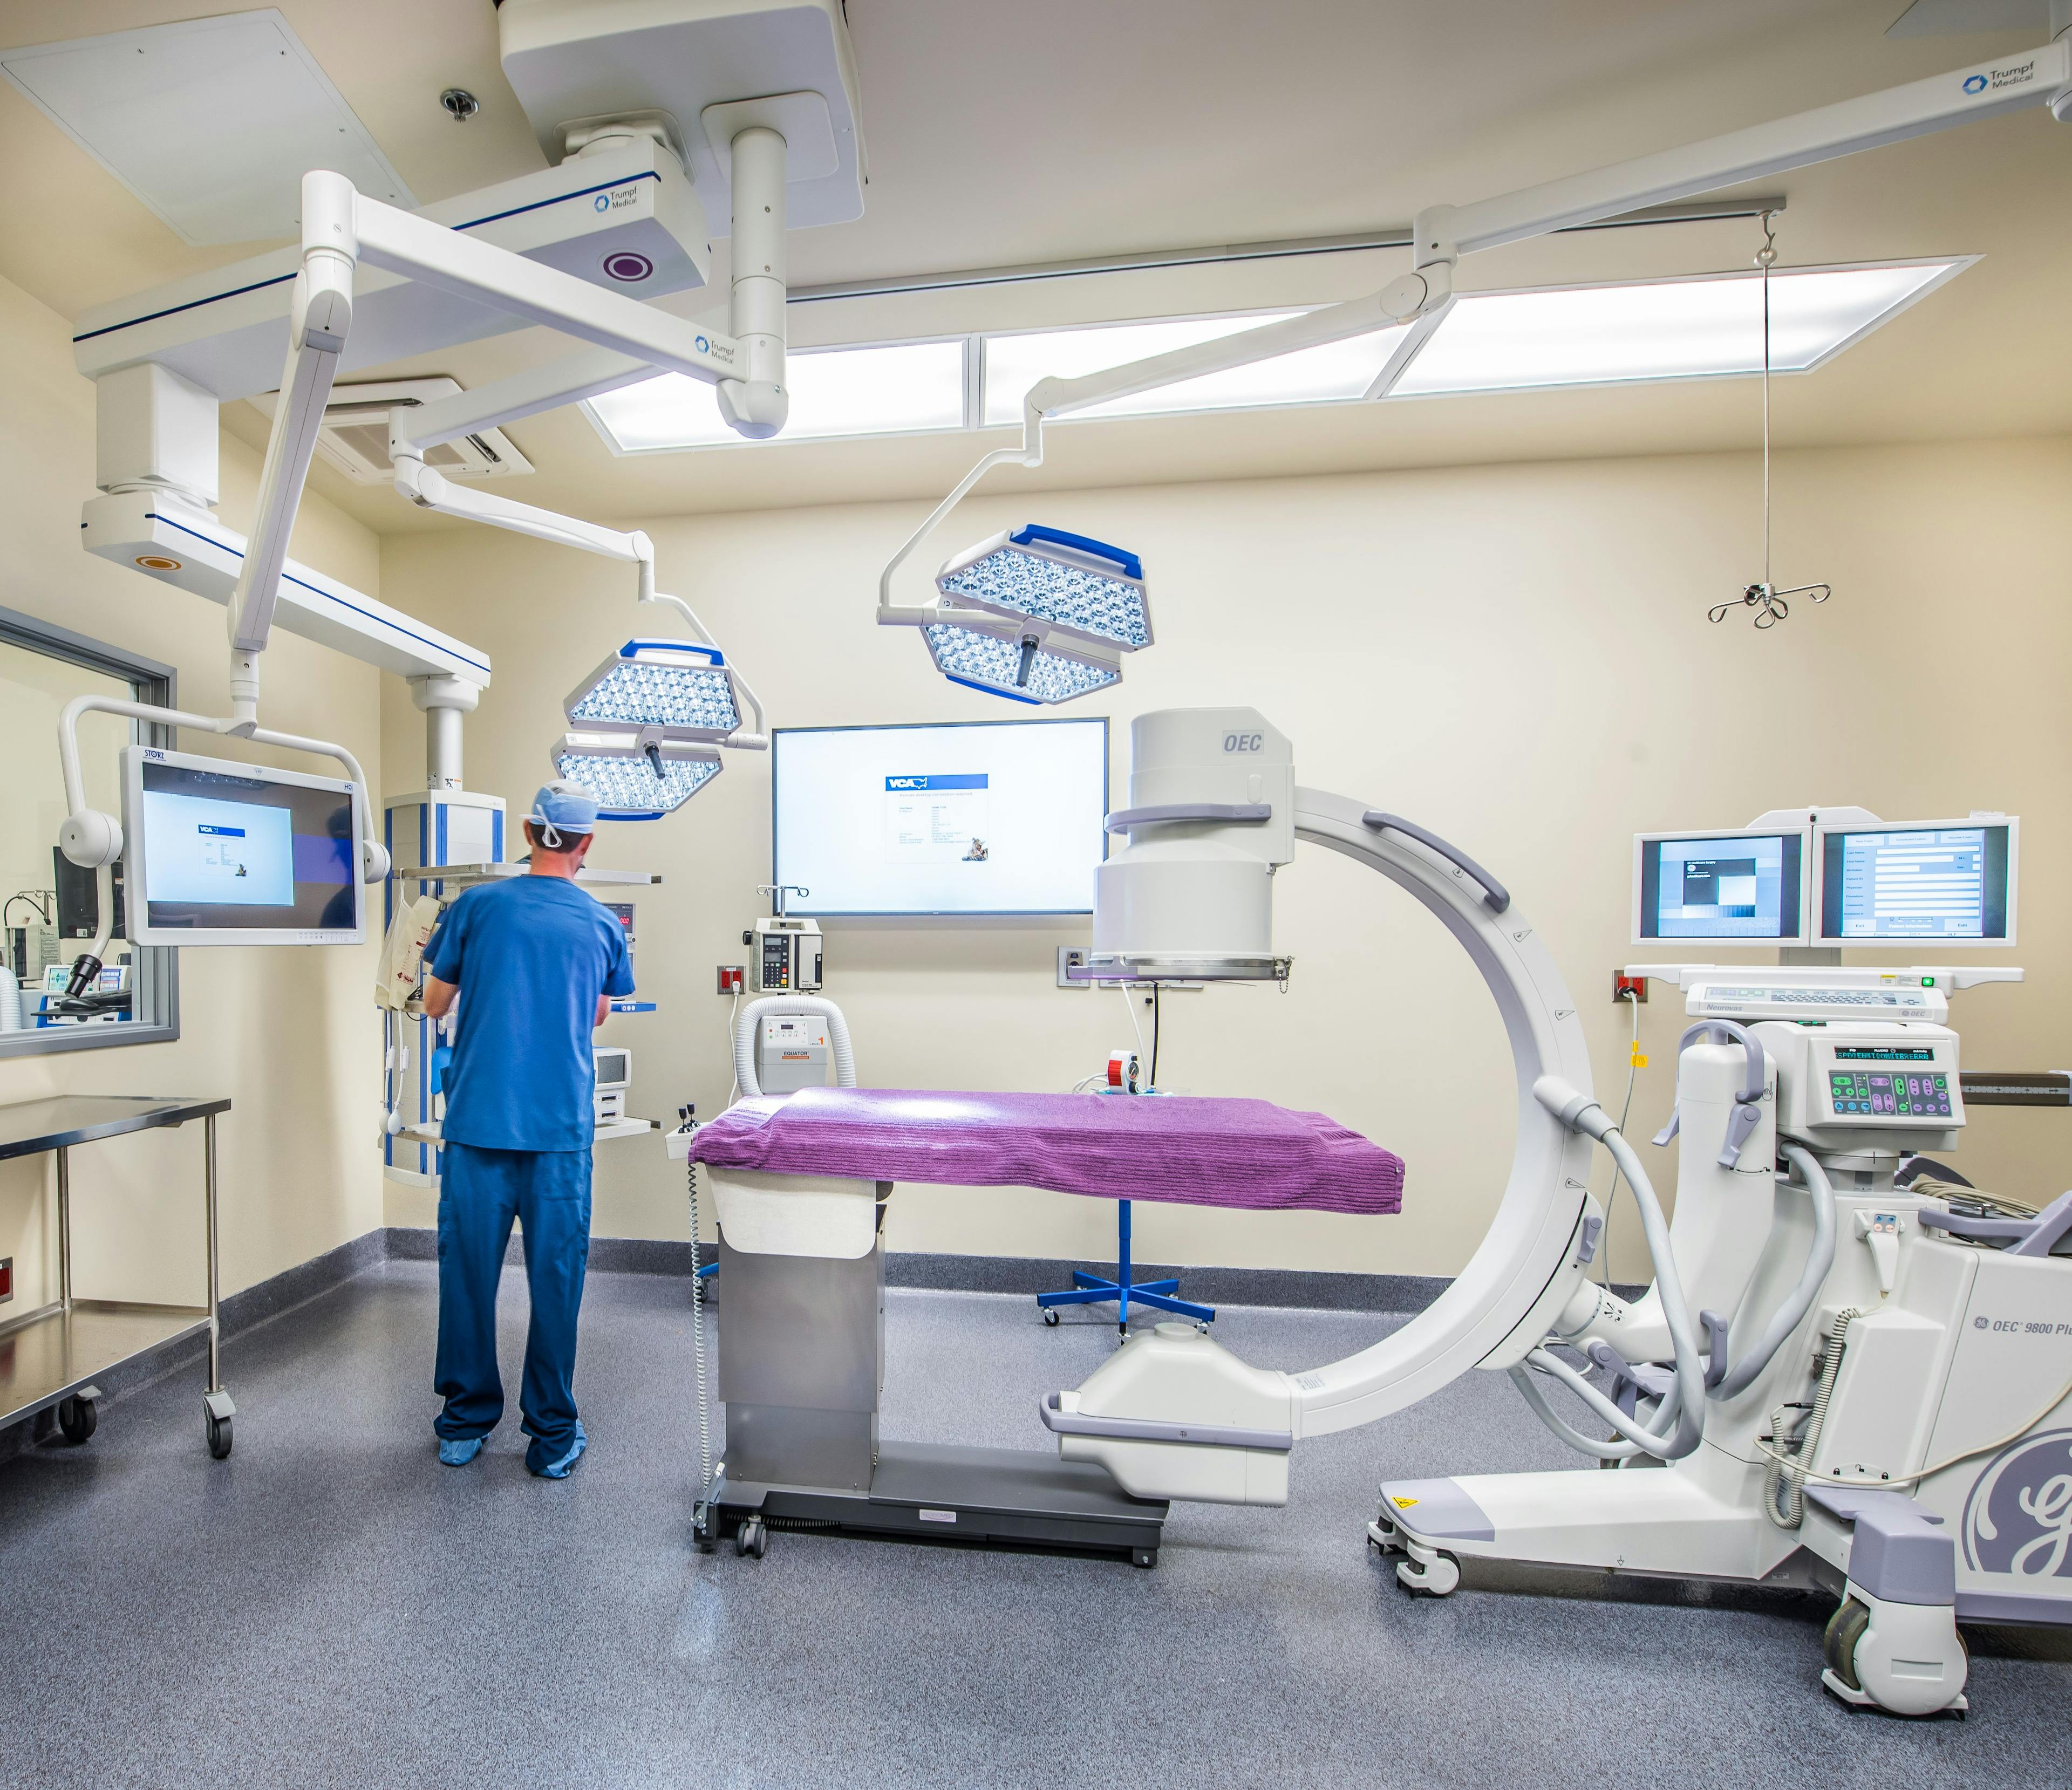 Six surgery suites provide ample space for the multiple specialists to work, including 2 suites dedicated to minimally invasive procedures.